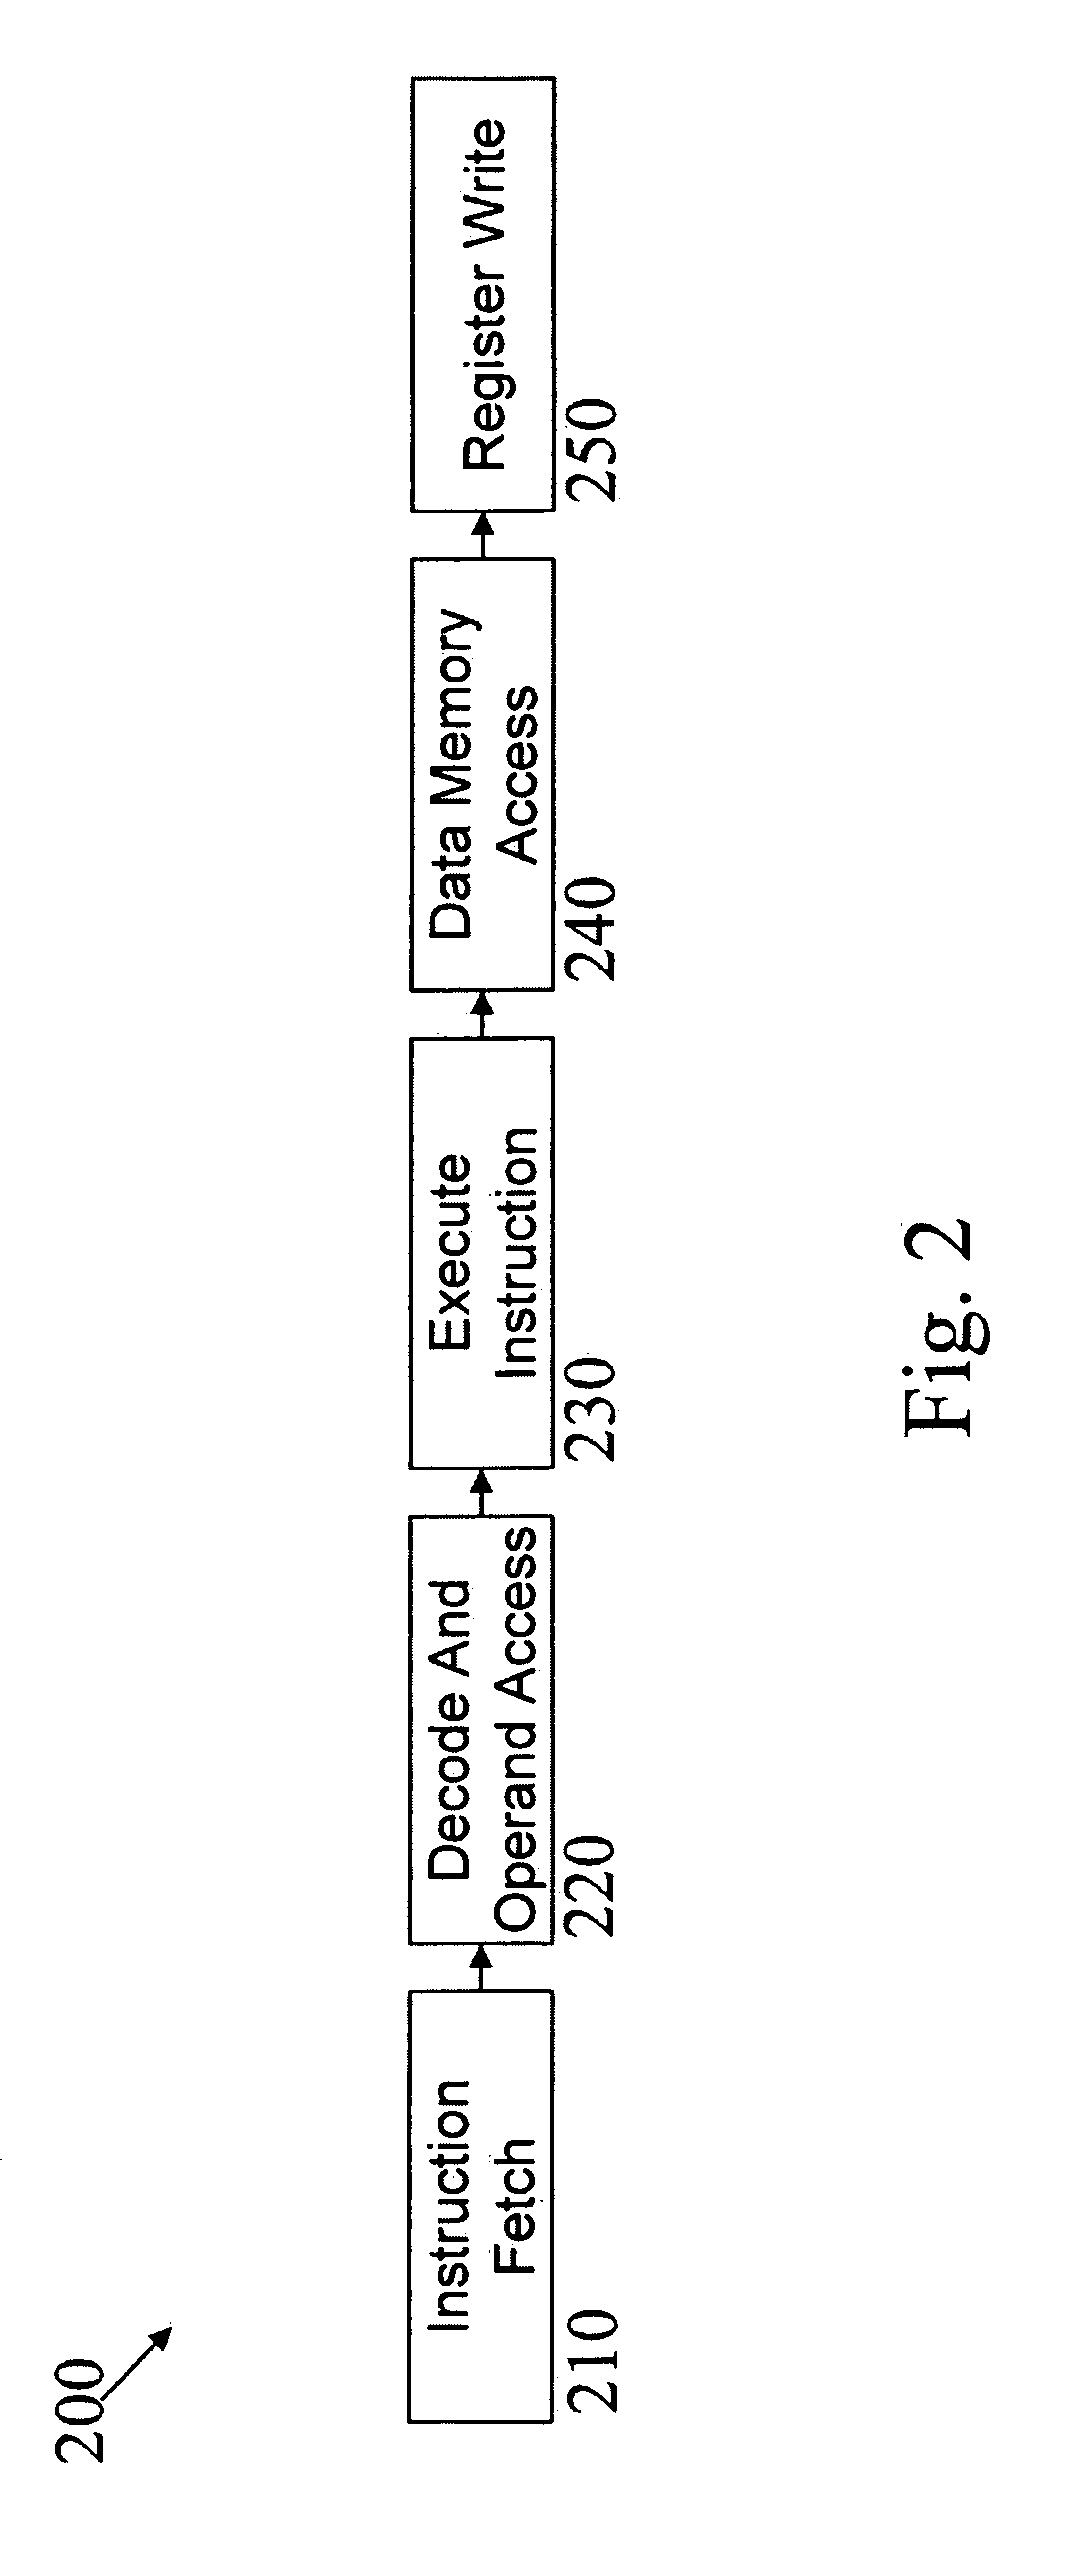 Method, system and computer program product for exploiting orthogonal control vectors in timing driven systems